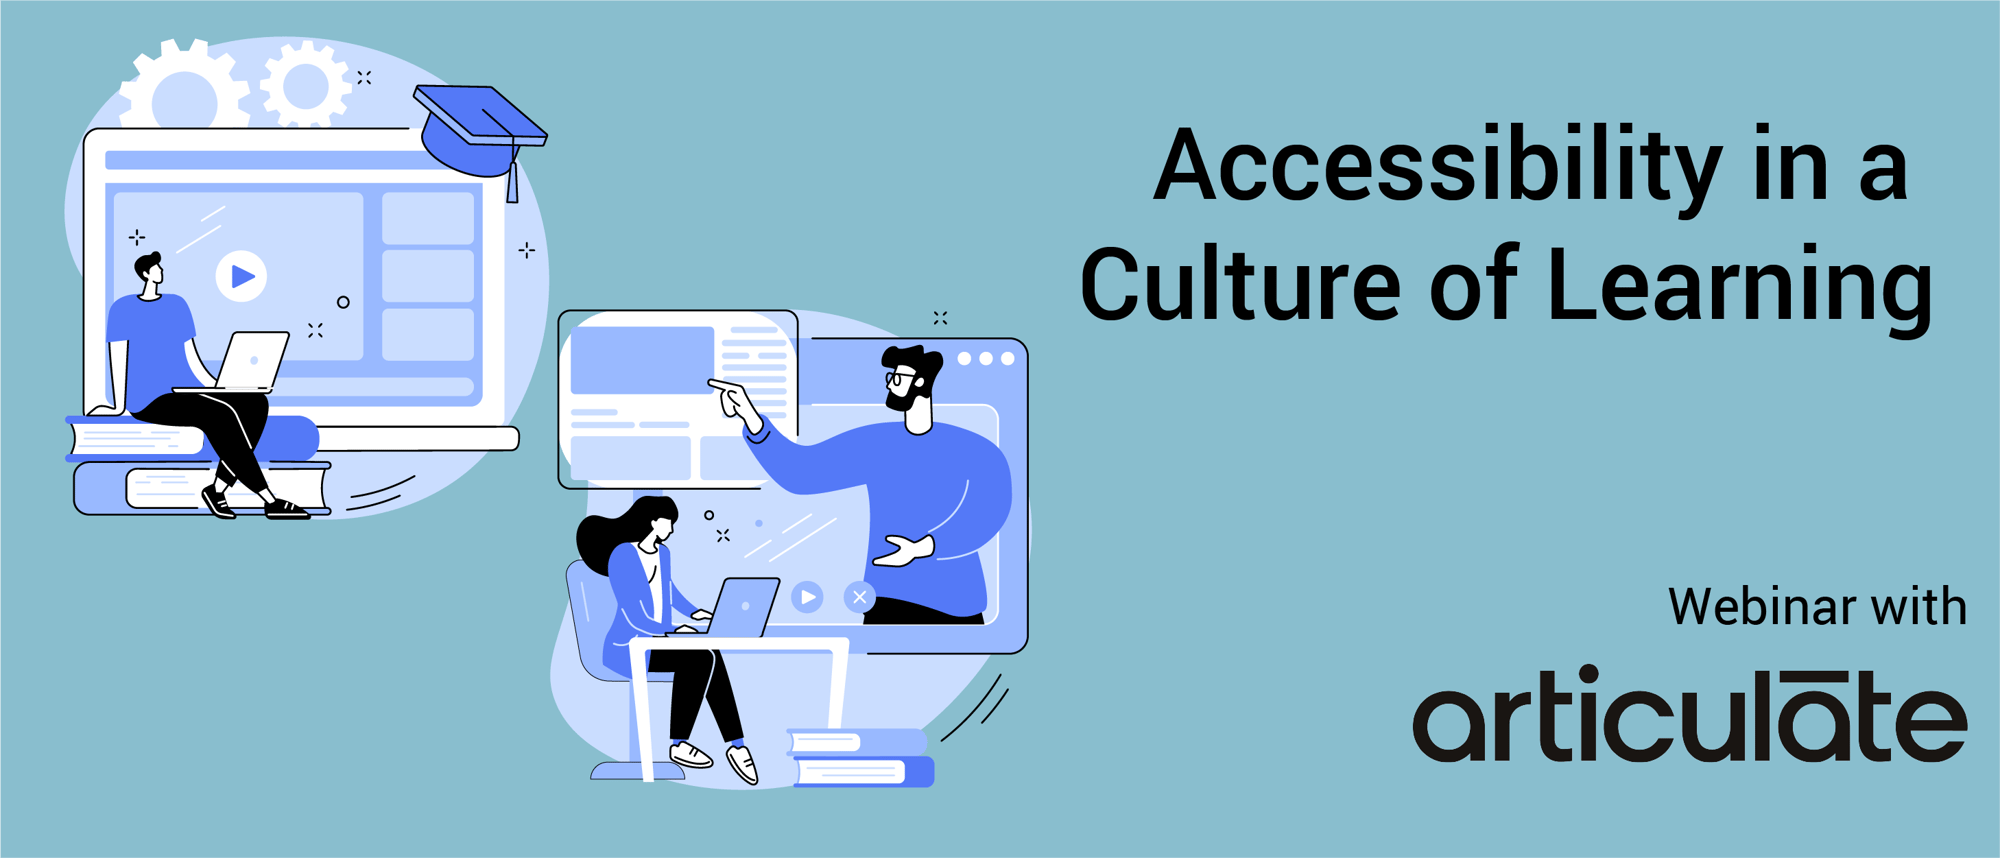 Illustration of people learning in a digital environment alongside the words Accessibility in a Culture of Learning, webinar with Articulate